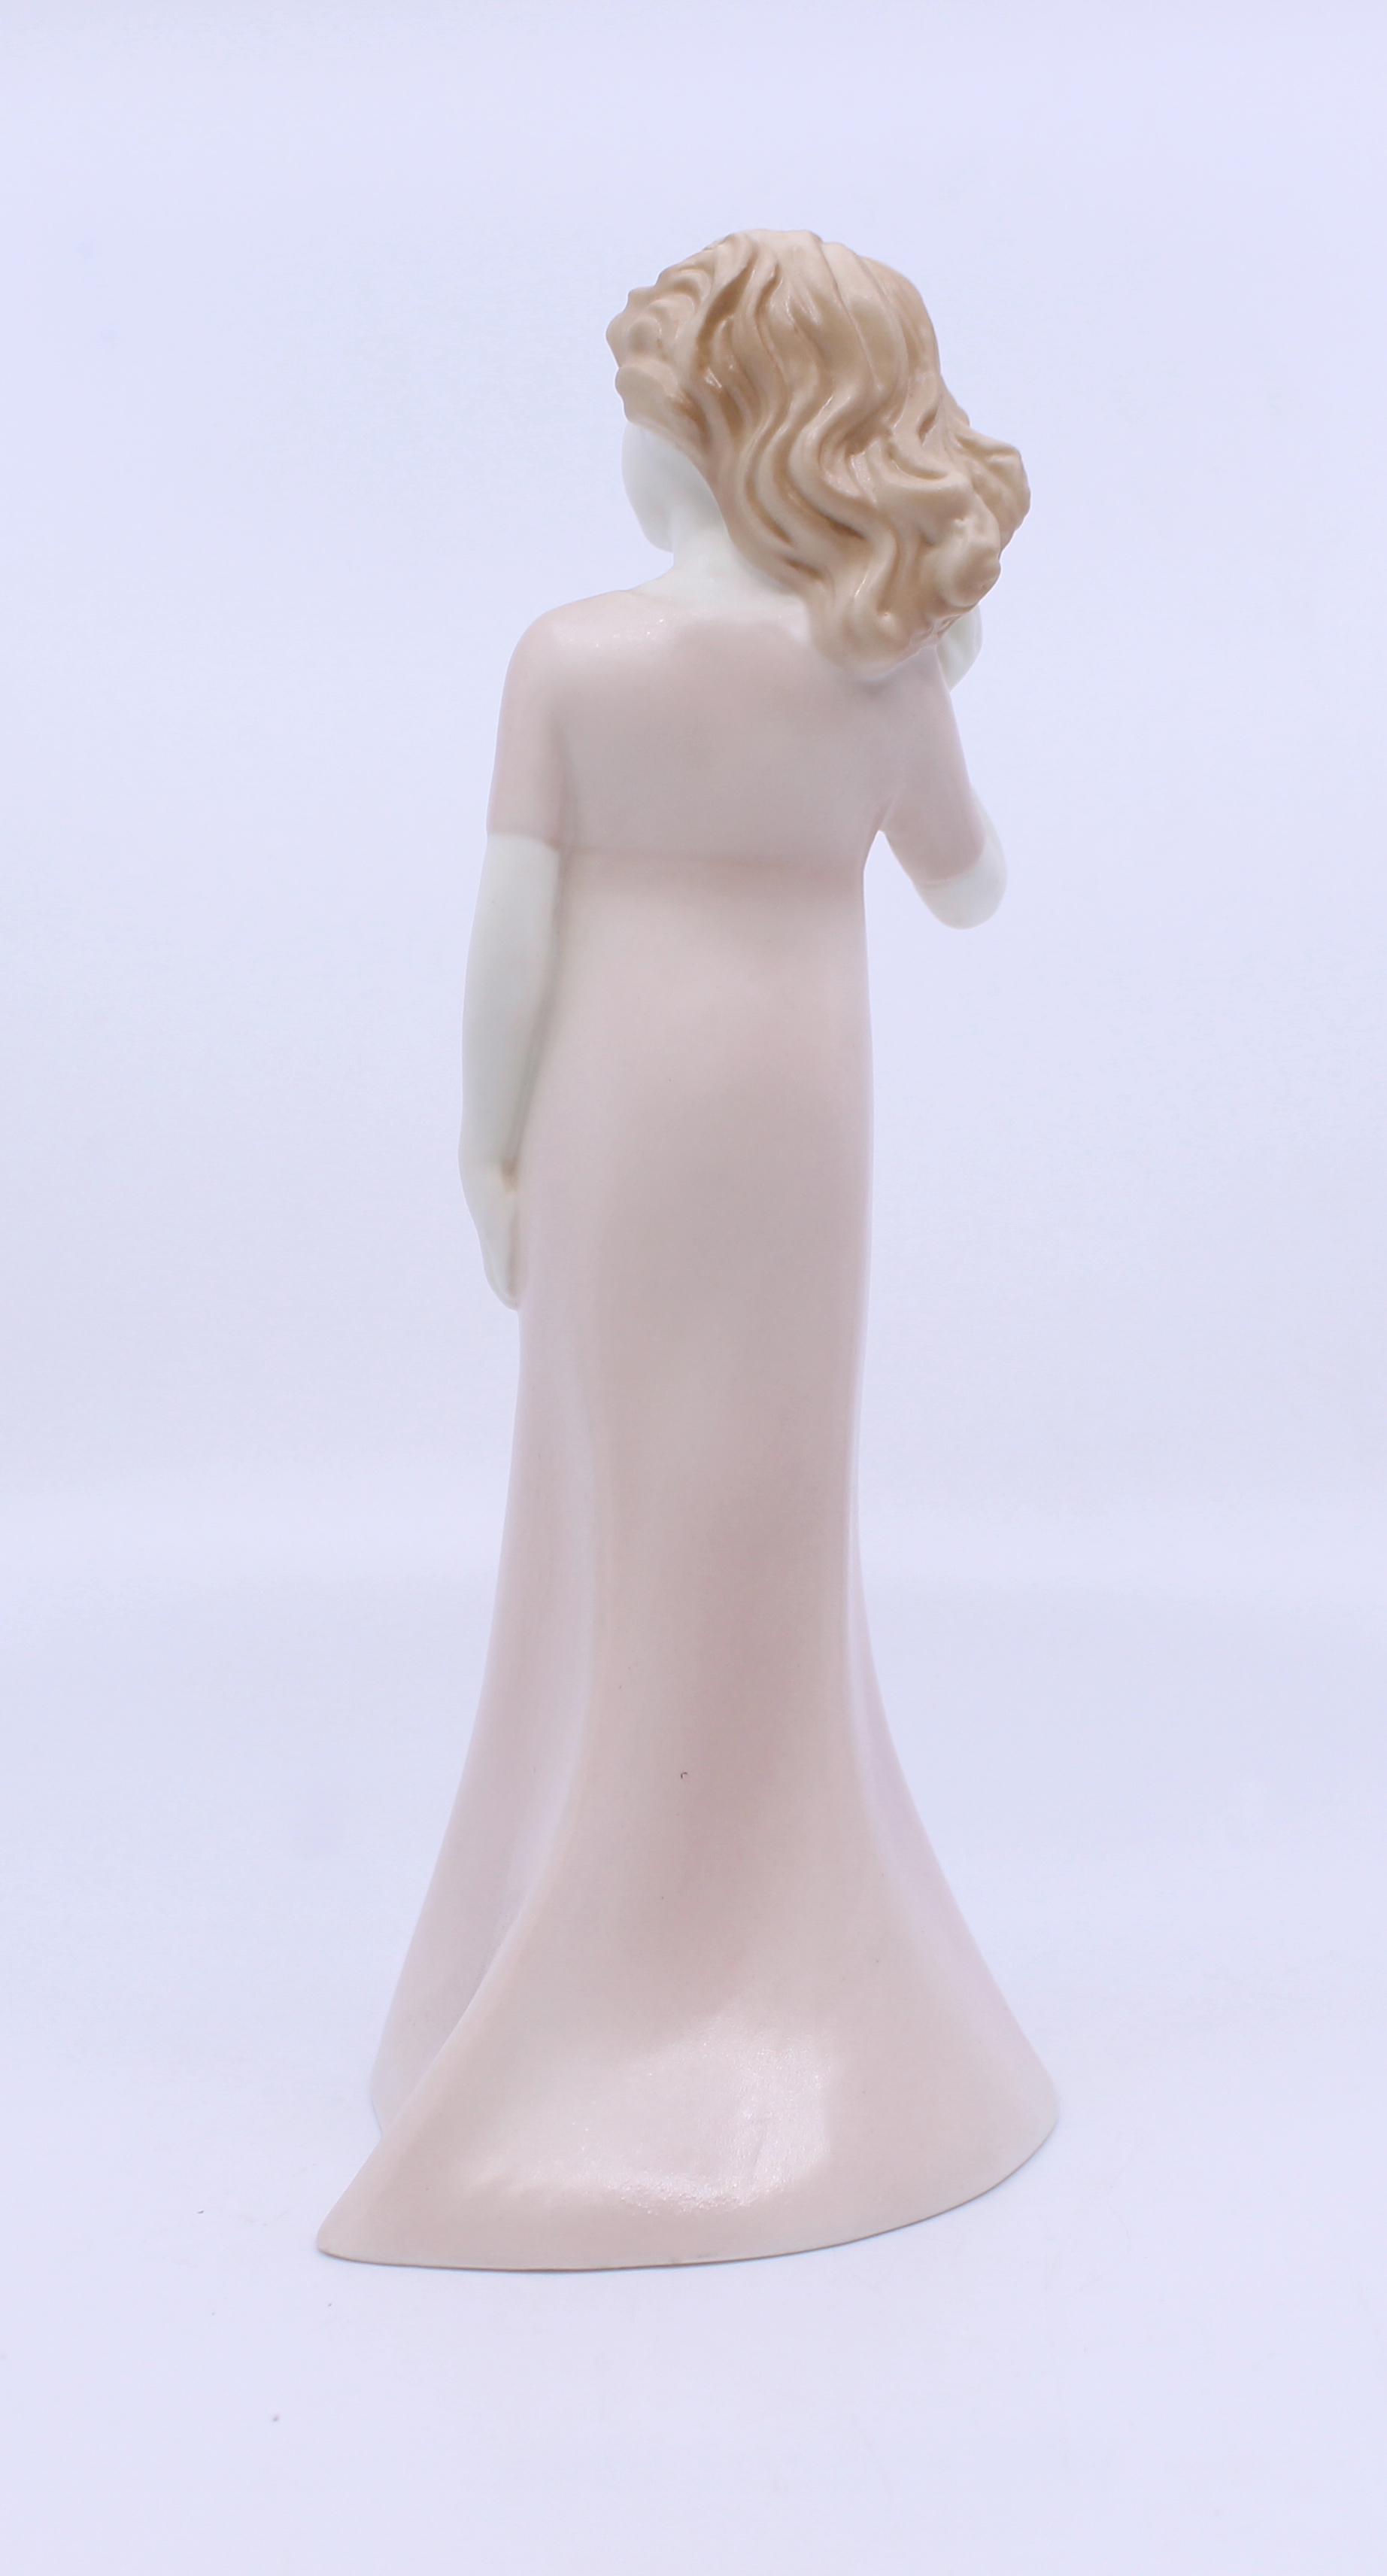 Royal Worcester Figurine Pretty as a Picture - Image 3 of 5